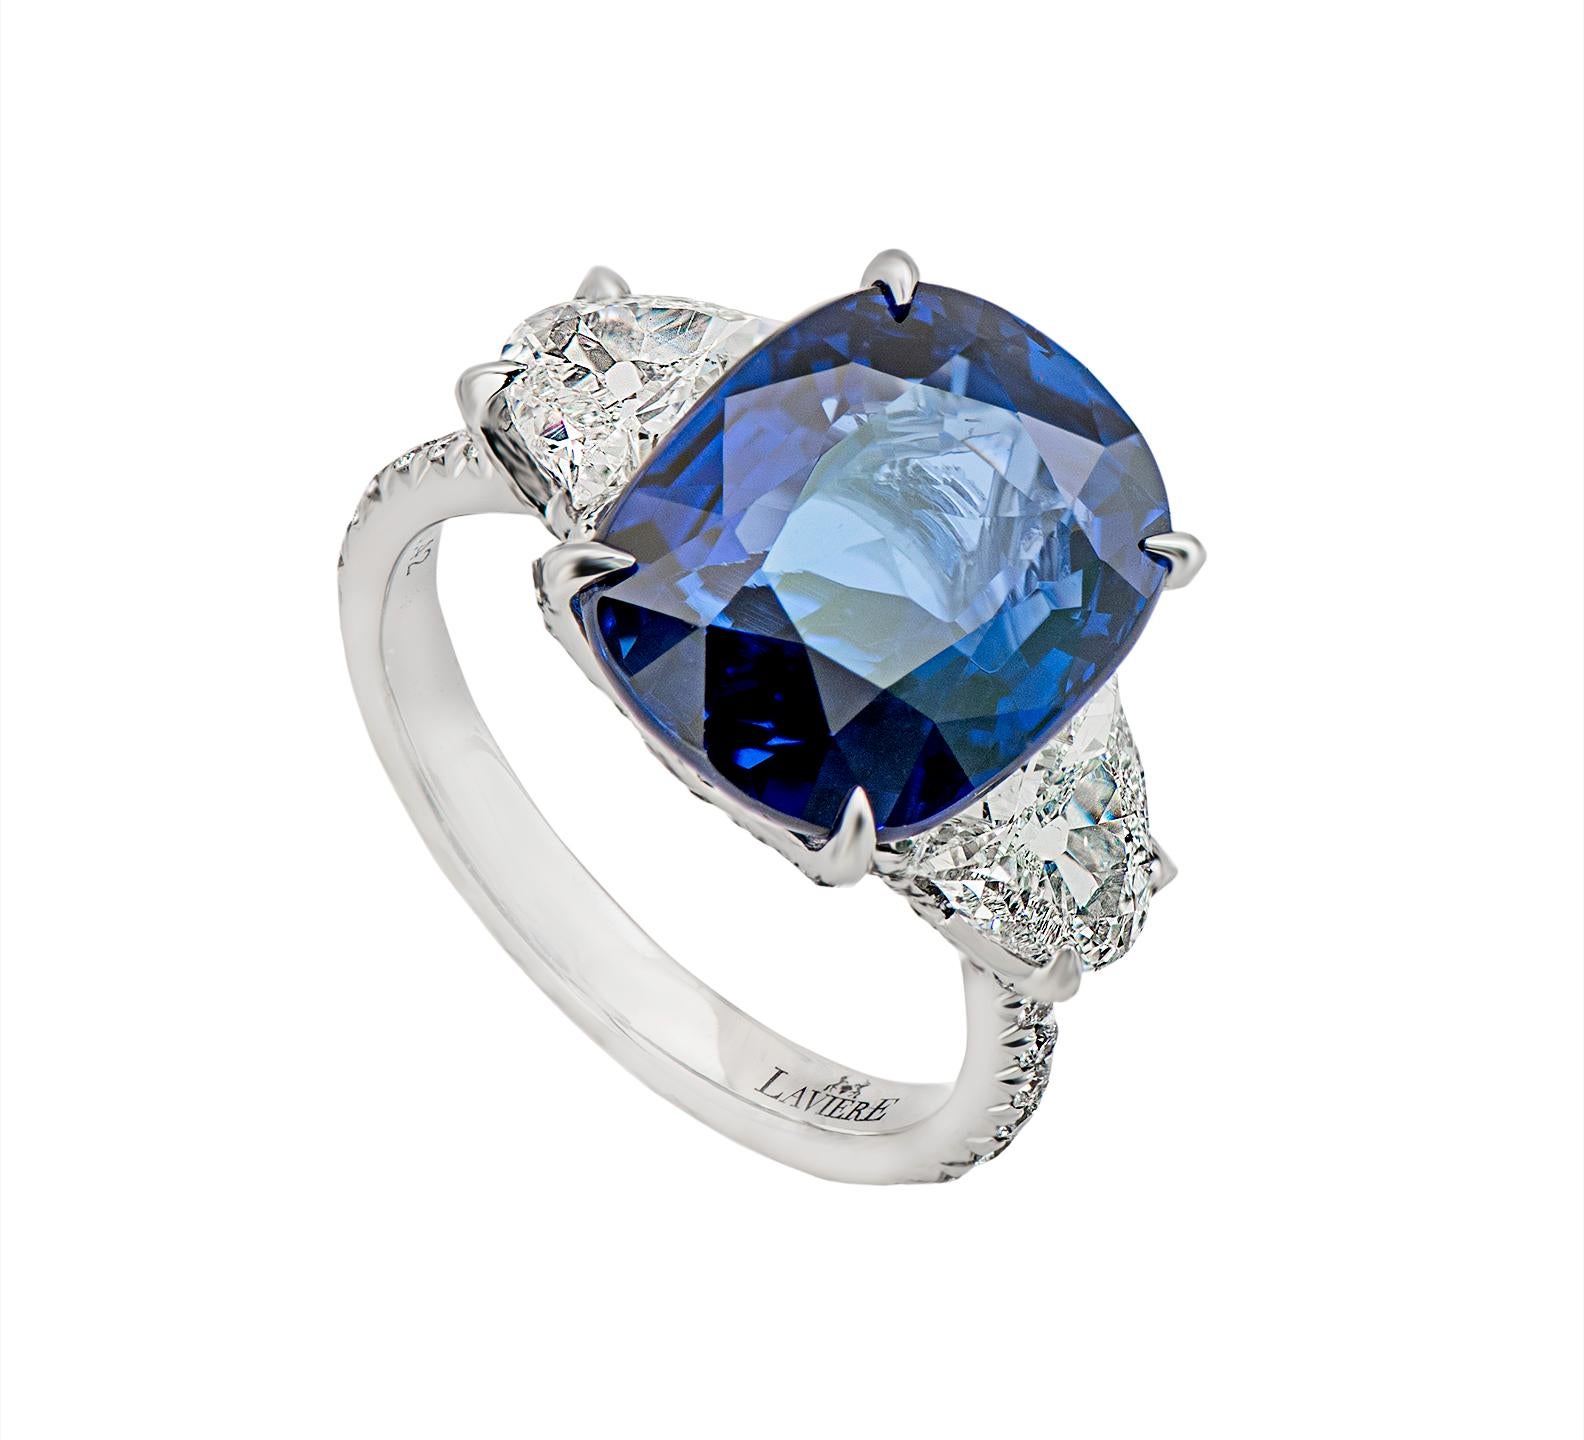 18 karat white gold blue sapphire cocktail ring from the Azure collection of Laviere. The ring is set with a  8.2 carats blue sapphire and 0.42 carats taper cut diamonds. 
Gold Weight 5.83 grams. Diamond Clarity VS-SI. Diamond Colour H-I.
The ring